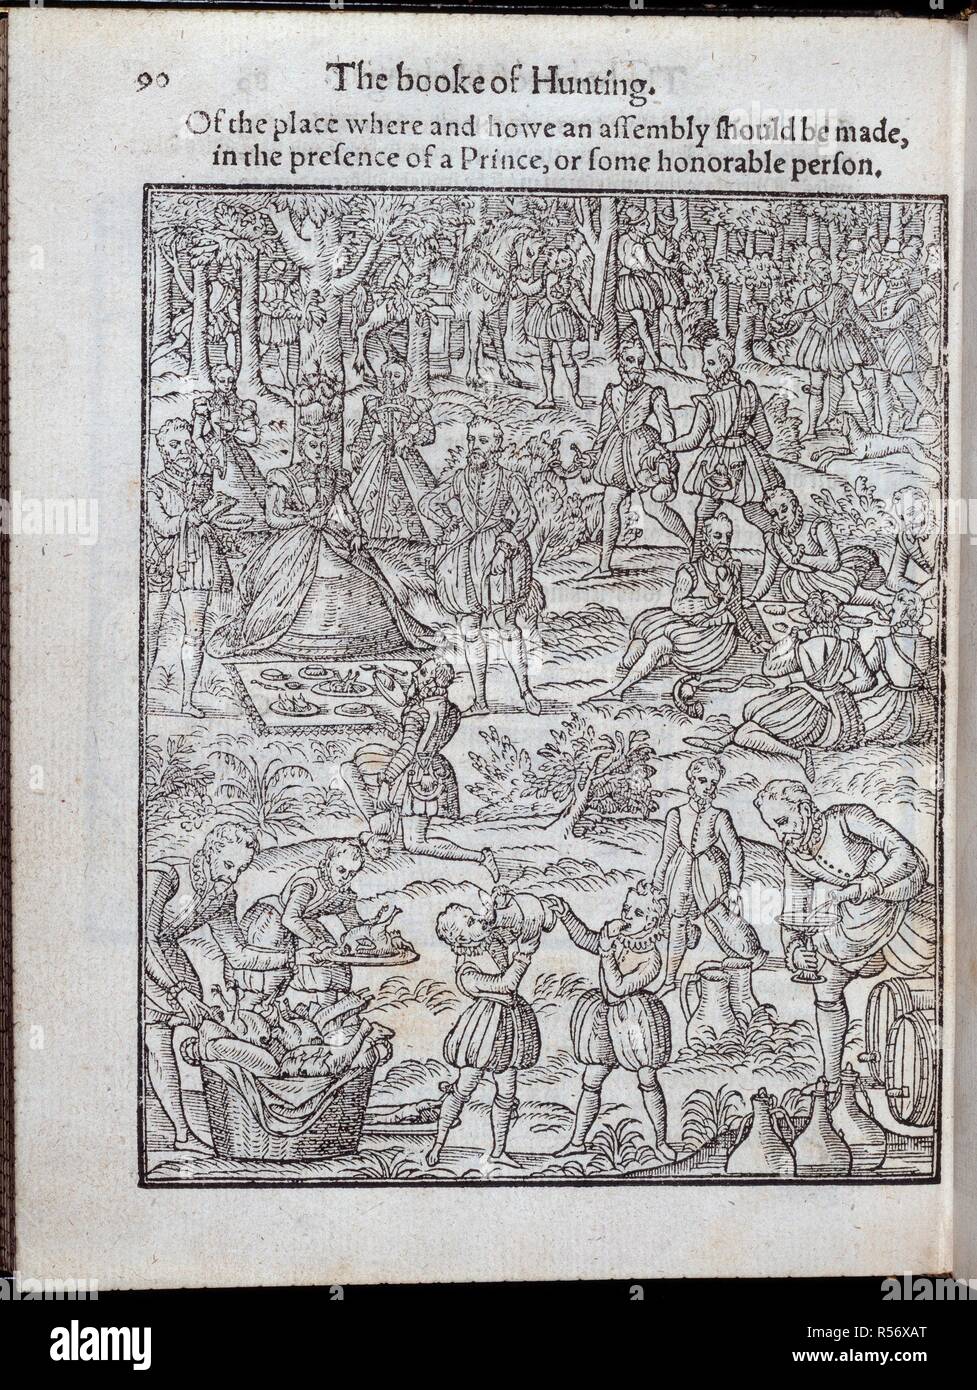 Elizabeth I. The Noble Arte of Venerie or Hunting. Wherein is h. London, 1575. Elizabeth I at a picnic in a forest.  Image taken from The Noble Arte of Venerie or Hunting. Wherein is handled and set out the Vertues, Nature, and Properties of fiuetene sundrie Chaces togither, with the order and maner how to Hunte and kill euery one of them. Translated and collected out of the best approued Authors and reduced into such order and proper termes as are used here, in this noble Realme of England.  Originally published/produced in London, 1575. . Source: G.2372.(2), 90. Stock Photo